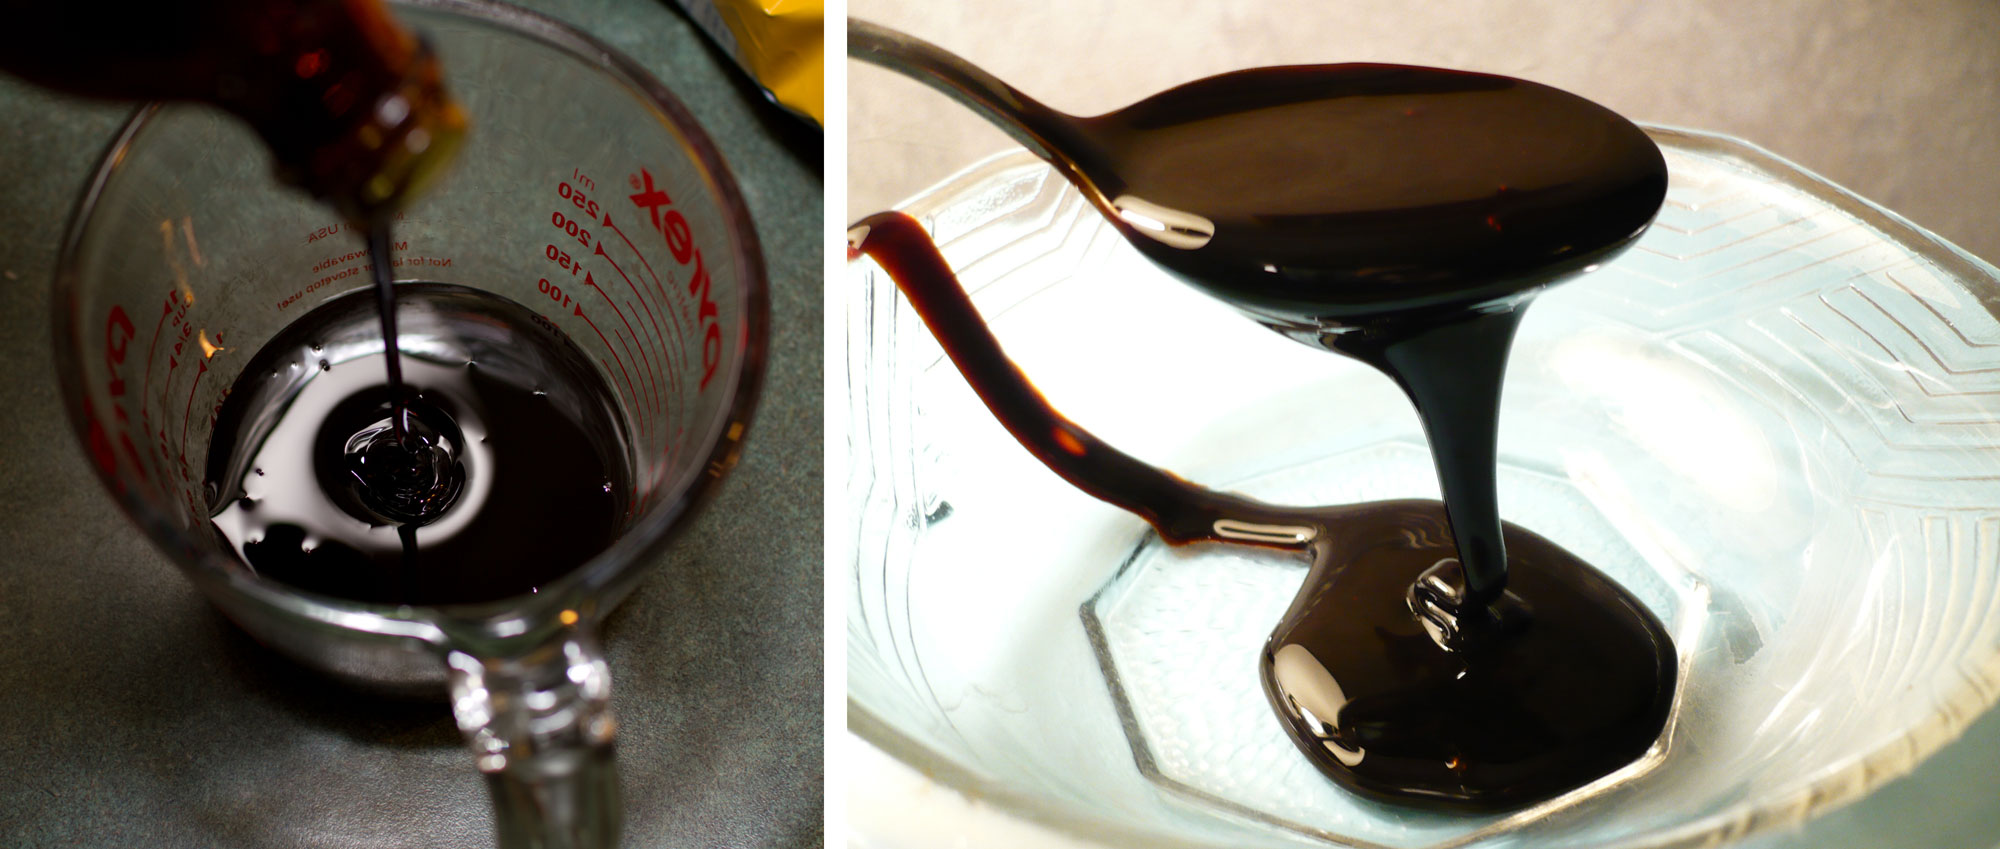 2-panel image showing molasses, which is a thick, dark brown syrup. Panel 1: Photograph of molasses being poured from a bottle into a glass measuring cut. Panel 2: Photograph of a spoonful of molasses, with molasses drizzling into a glass bowl below.